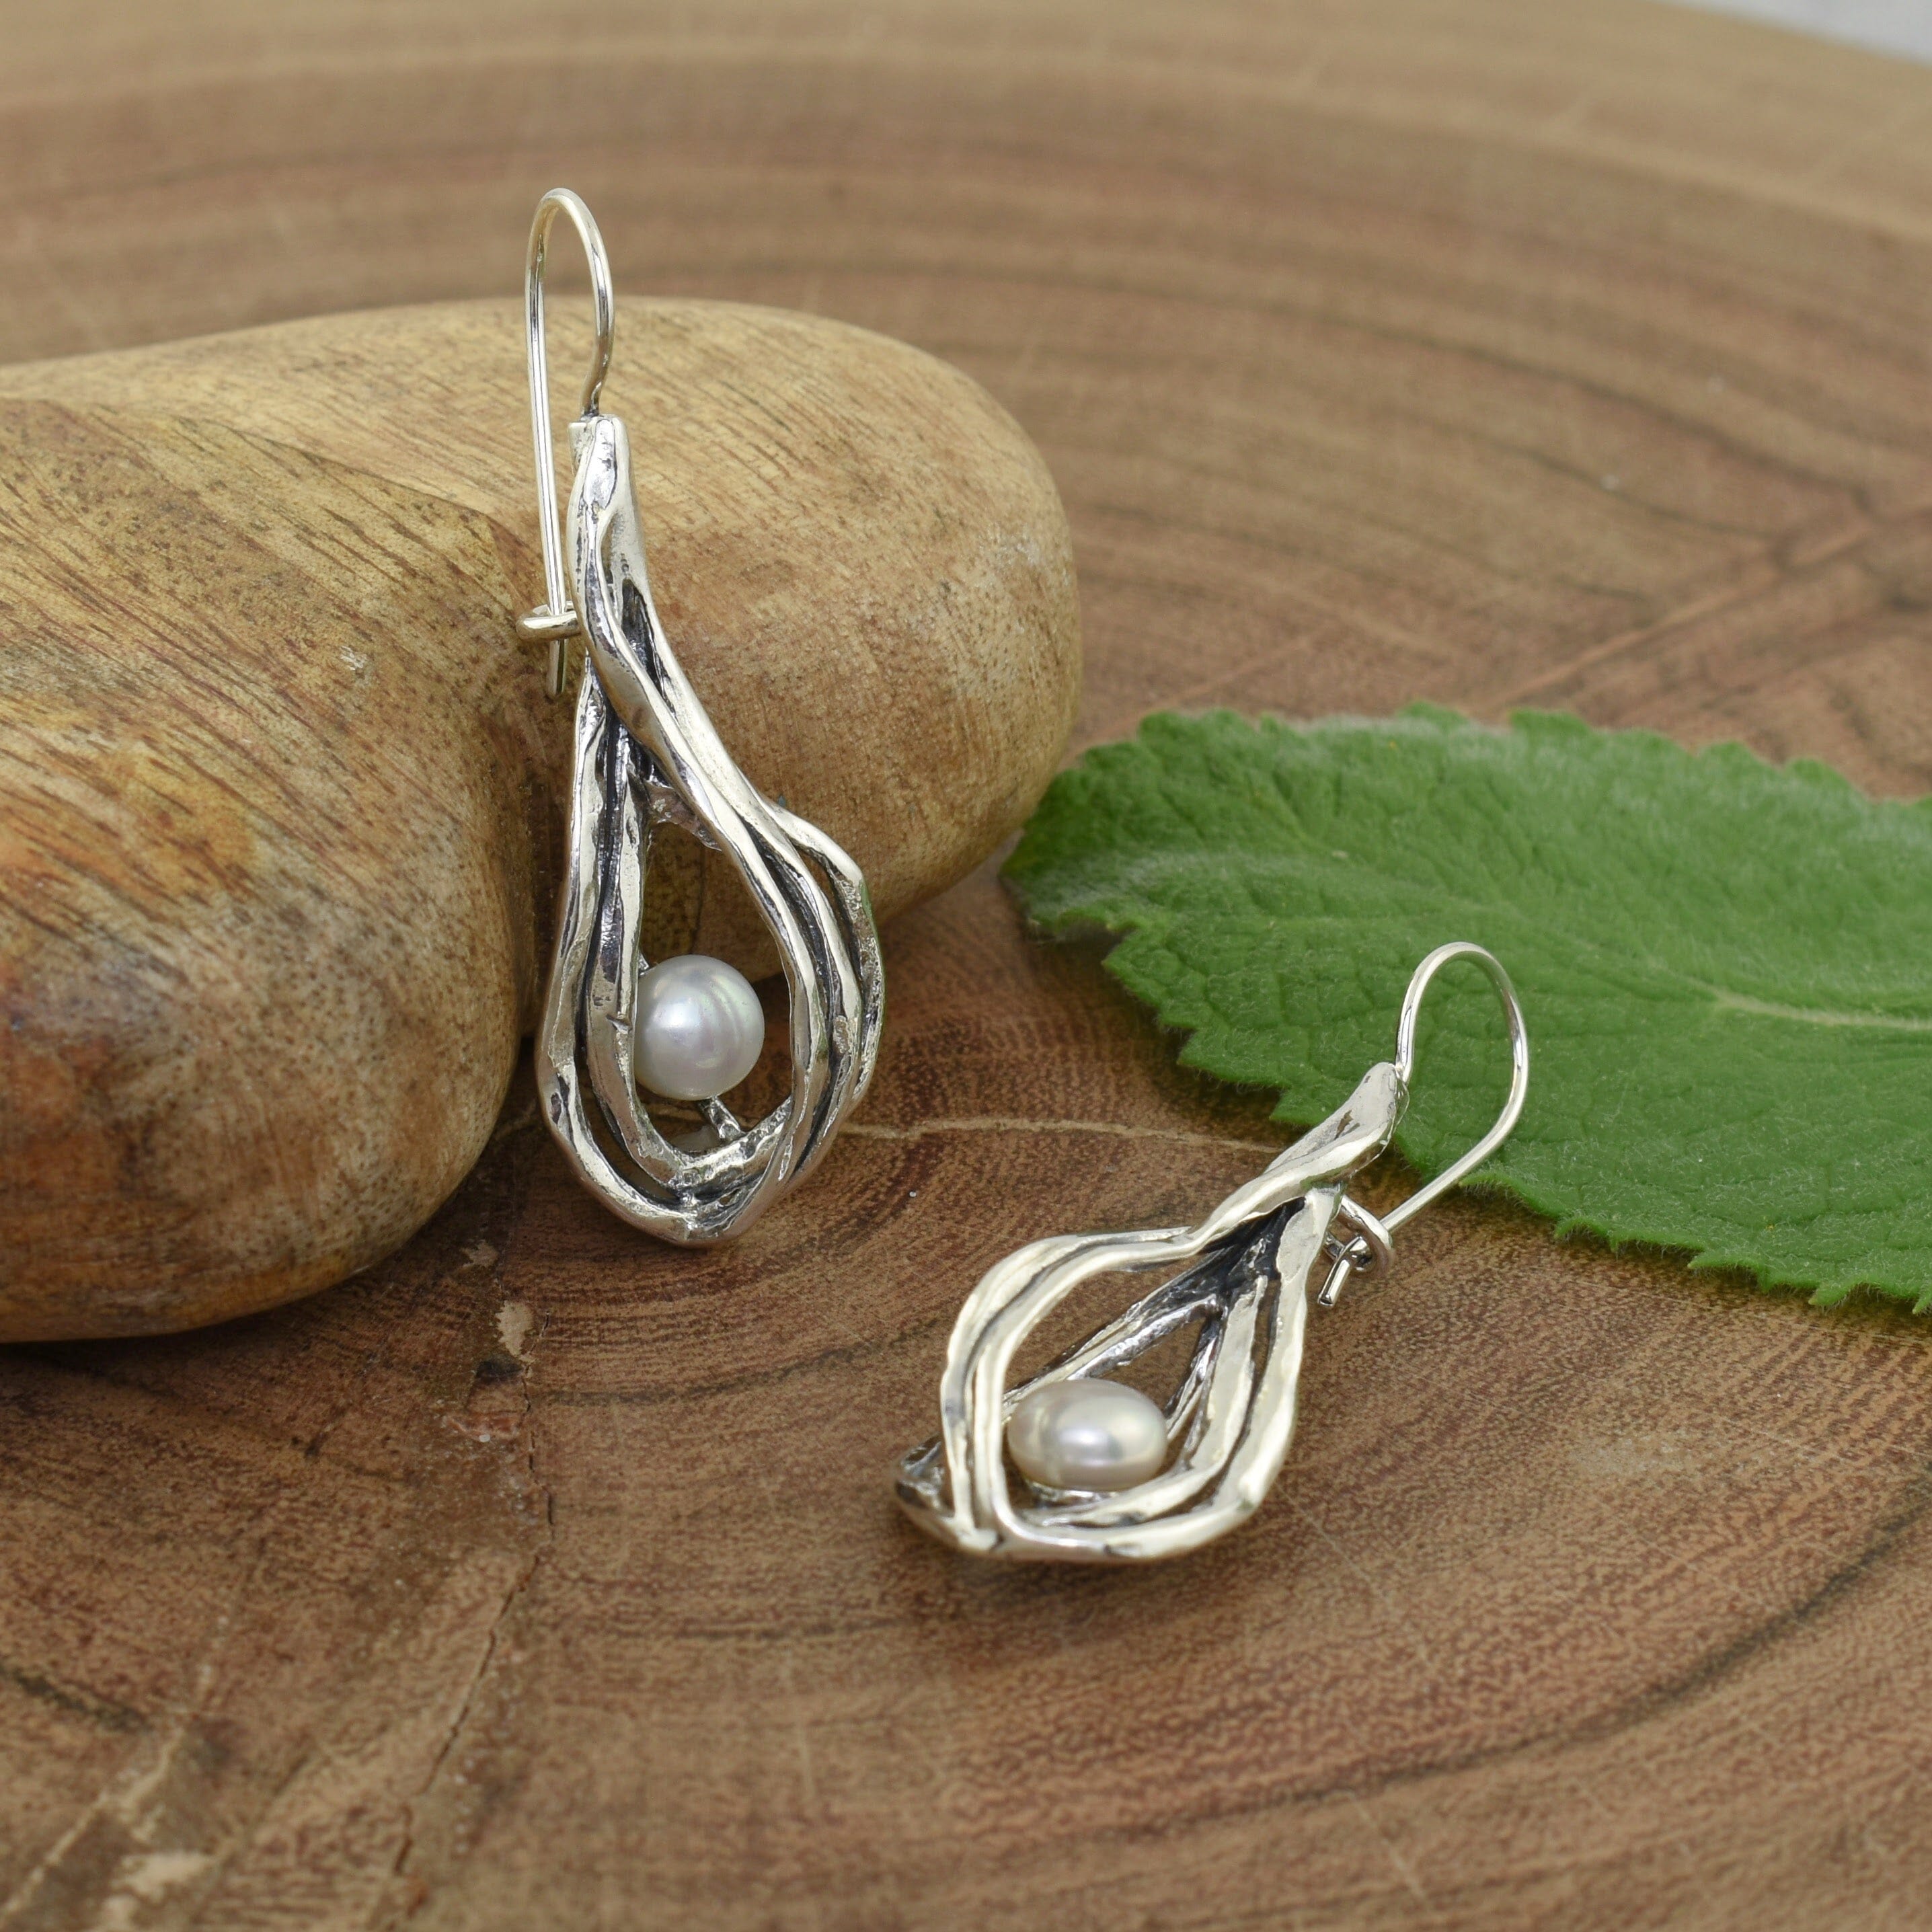 Handcrafted sterling silver and freshwater pearl earrings on Secure French Backs